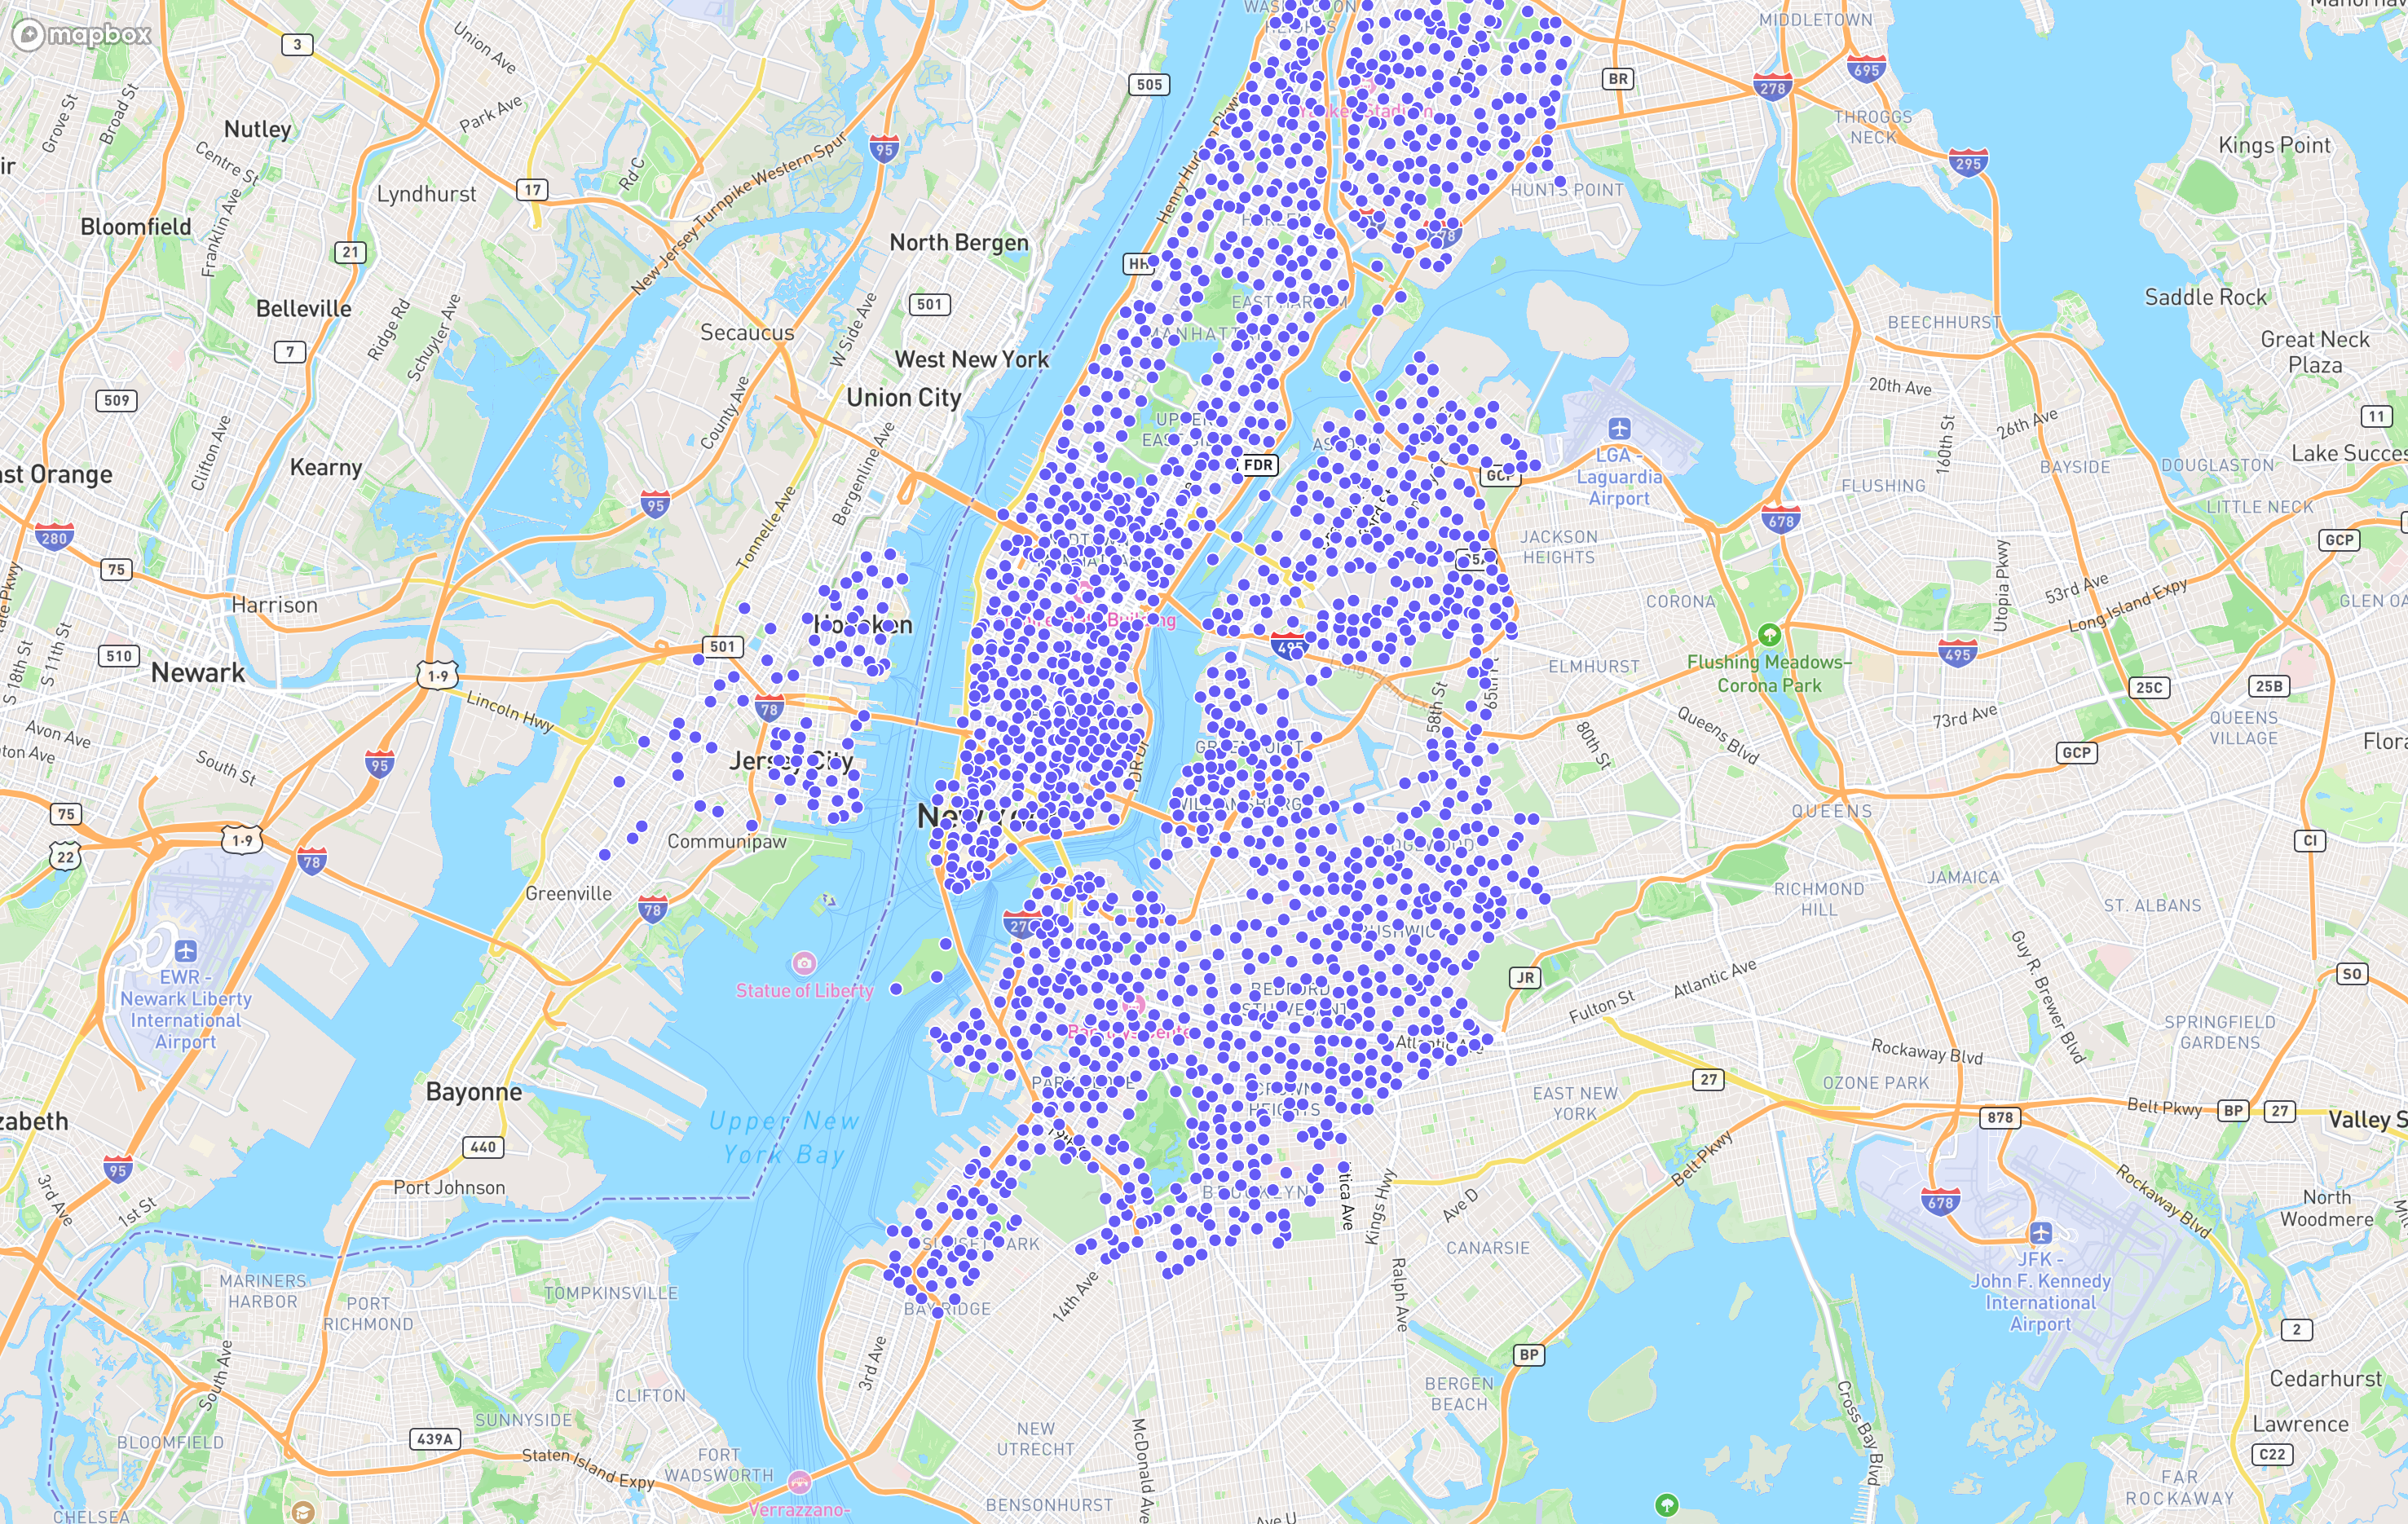 a blurry map of nyc citibike stations